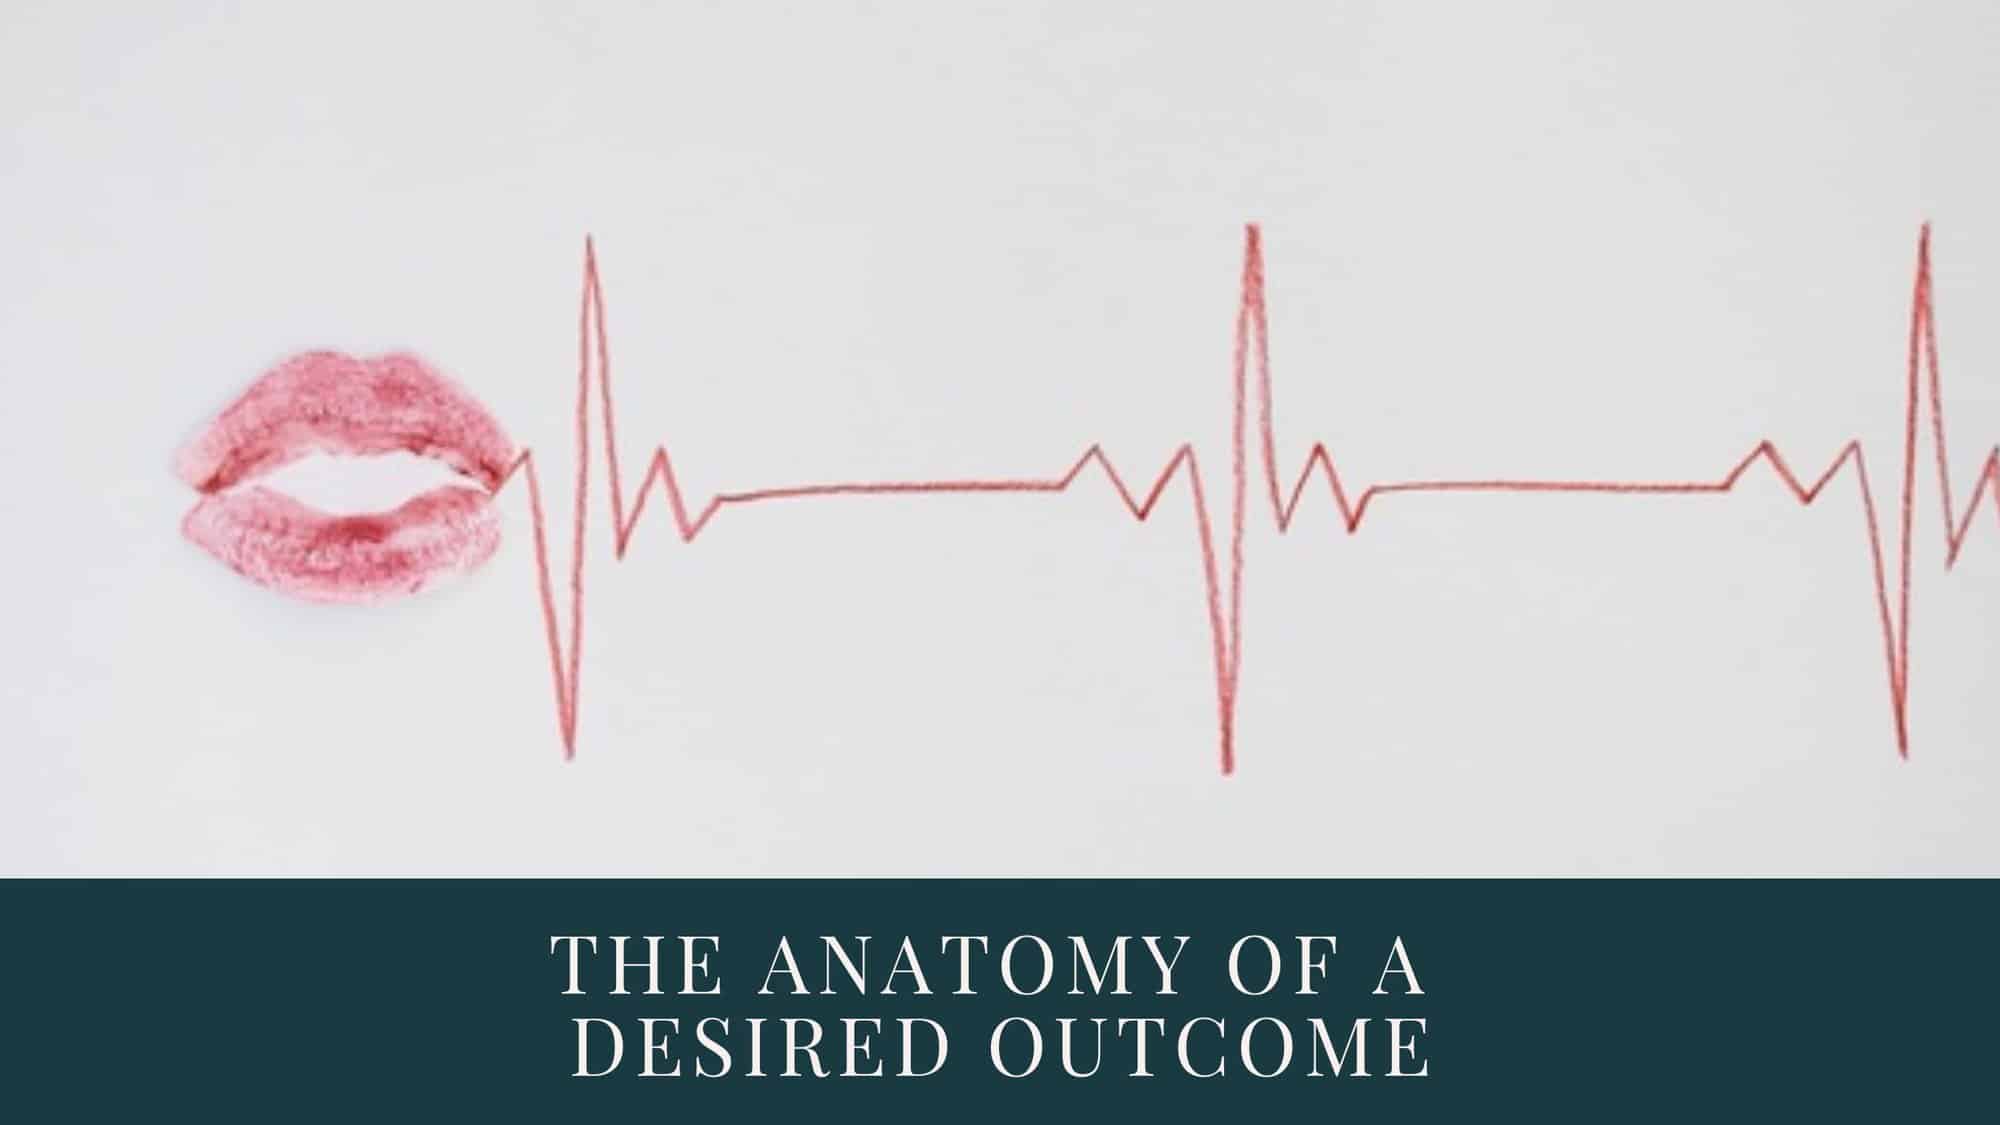 The anatomy of a desired outcome - The anatomy of a Desired Outcome Maybe you've noticed how sometimes clients start a session by saying: 'I want to get confident' while other times, it's more like: 'I want to start to feel into the possibility of maybe one day connecting with the start of feeling something like confidence' The way that the Desired Outcome gets phrased tells us a lot about how the client currently relates to the Desired Outcome, and there are clues in that first phrasing that tell us about what the process of unfolding might be like. (Thank you James Lawley, who first pointed me to this! I love how a client's system can't help but show us its structures of organisation and meaning making.) You could say that the closer the 'I' is to the word that stands for what the client wants, the closer they are at this very moment to spiritually, physically, mentally, emotionally being able to create that outcome for themselves. Of course, part of our aim in a coaching session is to bridge the metaphorical gap between where the 'I' is at the start of a session, and what it is that they want to call in. When you start to explore this with your client, start by exploring their true desire, the 'confidence' in these examples. What kind of confidence is that? Anything else about it? Where is it? If you are able to, develop this into a metaphor. Then go for the process that they identified: 'What kind of get, is that get, when you want to get confident?' - bring that into metaphor - or better yet, a process, a sequence expressed in embodied metaphor. This is the fastest way to help people create that inner shift in the session, and lay the foundation for that shift to last. Or, in the second instance: 'And what kind of 'start to feel into the possibility of maybe one day connecting with the start of feeling something like confidence' is that? - this will make the client reconsider and hone in on what's actually most important right now. In short: Often, you start by exploring the thing furthest away from the 'I' in the DO statement, especially when there is a lot of filler words between the I and the actual desire. The closer that desire is to the 'I', the less space the client gives themselves to hide away from what is tricky about this particular Desired Outcome. Kiss With Ekg Line Coming Out Of It by Marija Vukovic from NounProject.com